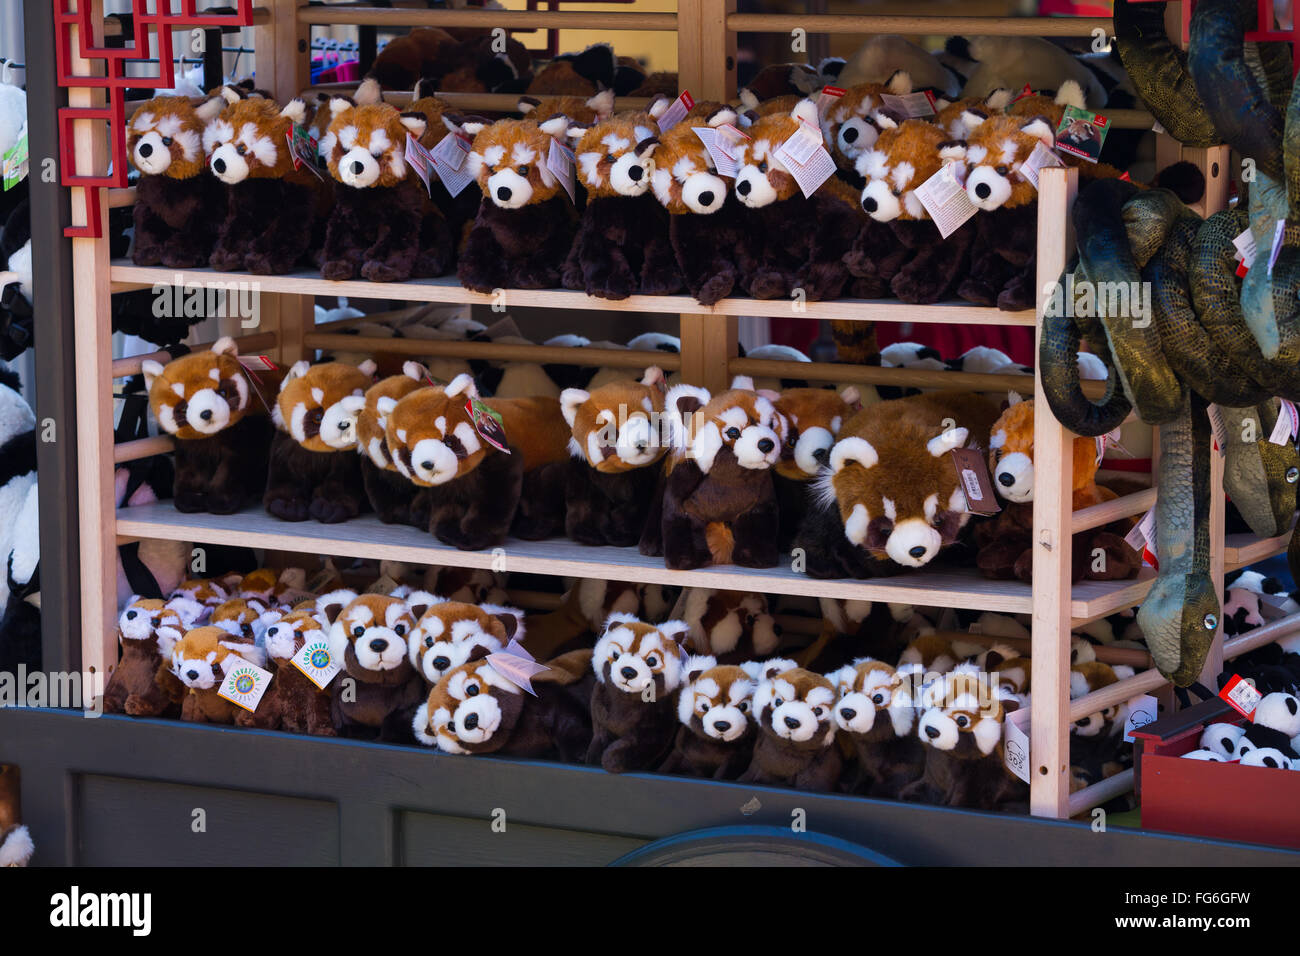 Stuffed animals for sale at the San Diego Zoo in California. Stock Photo